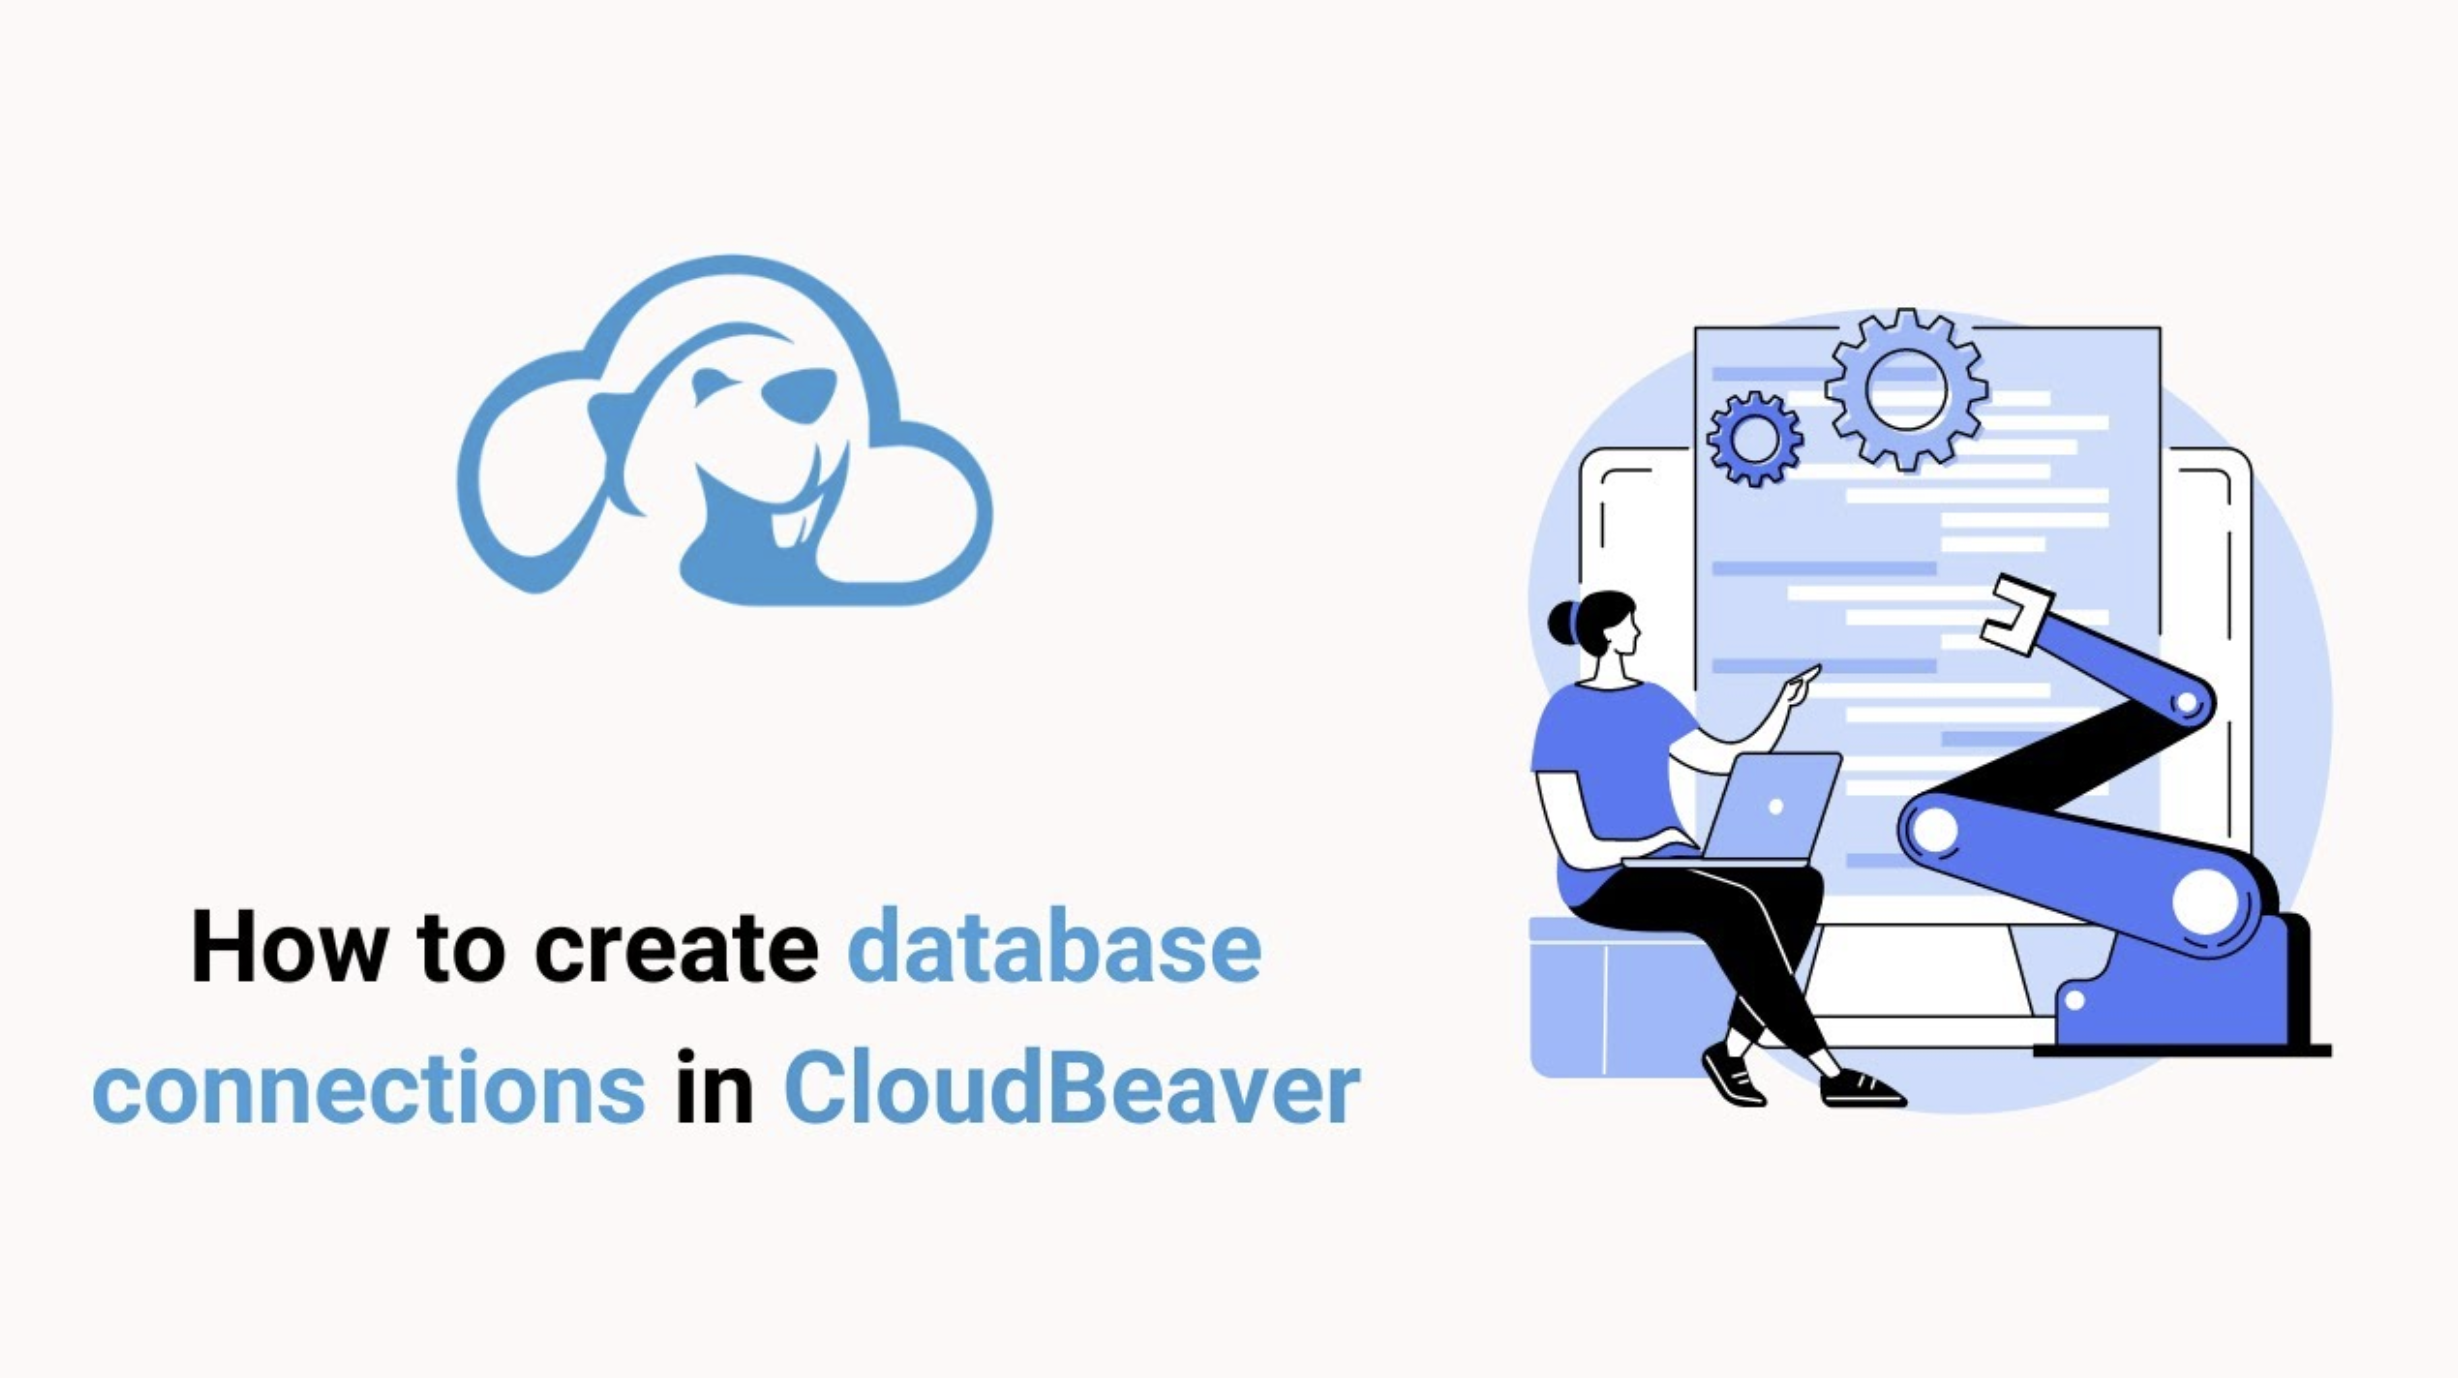 How to create a database connection in CloudBeaver